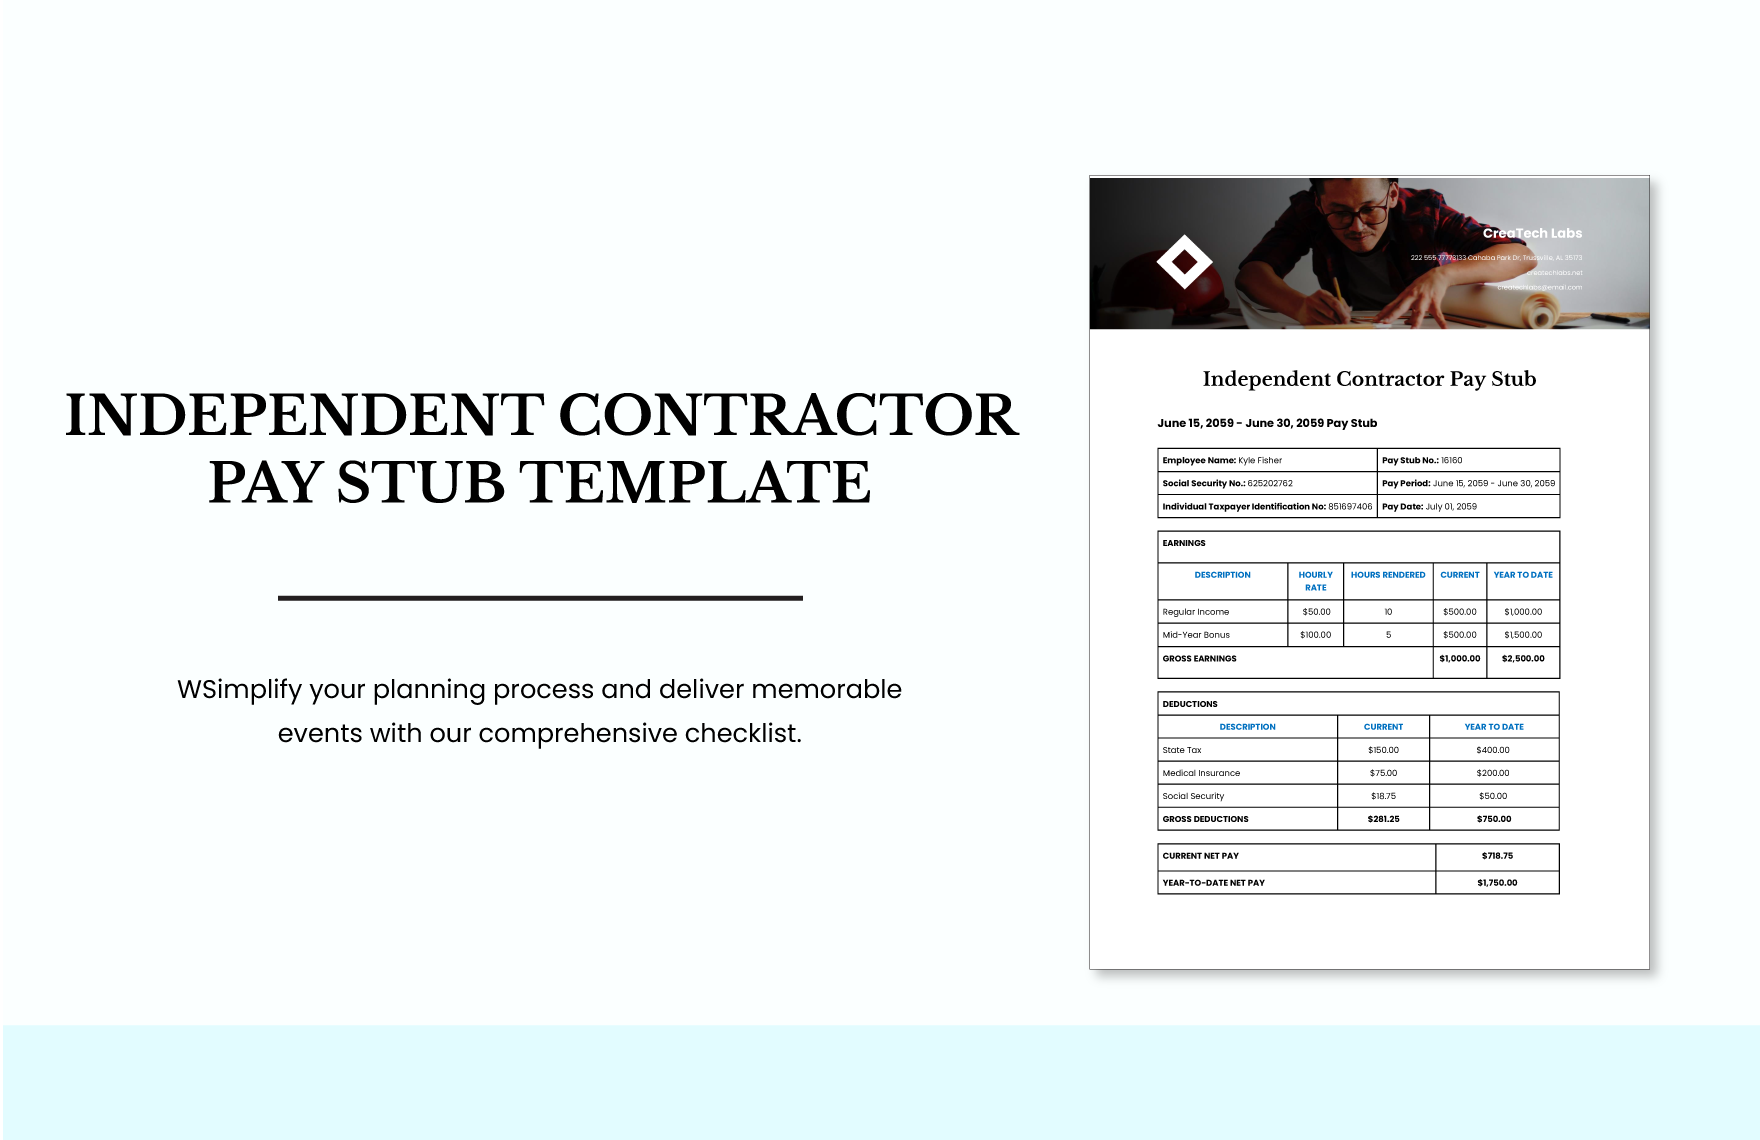 Independent Contractor Pay Stub Template